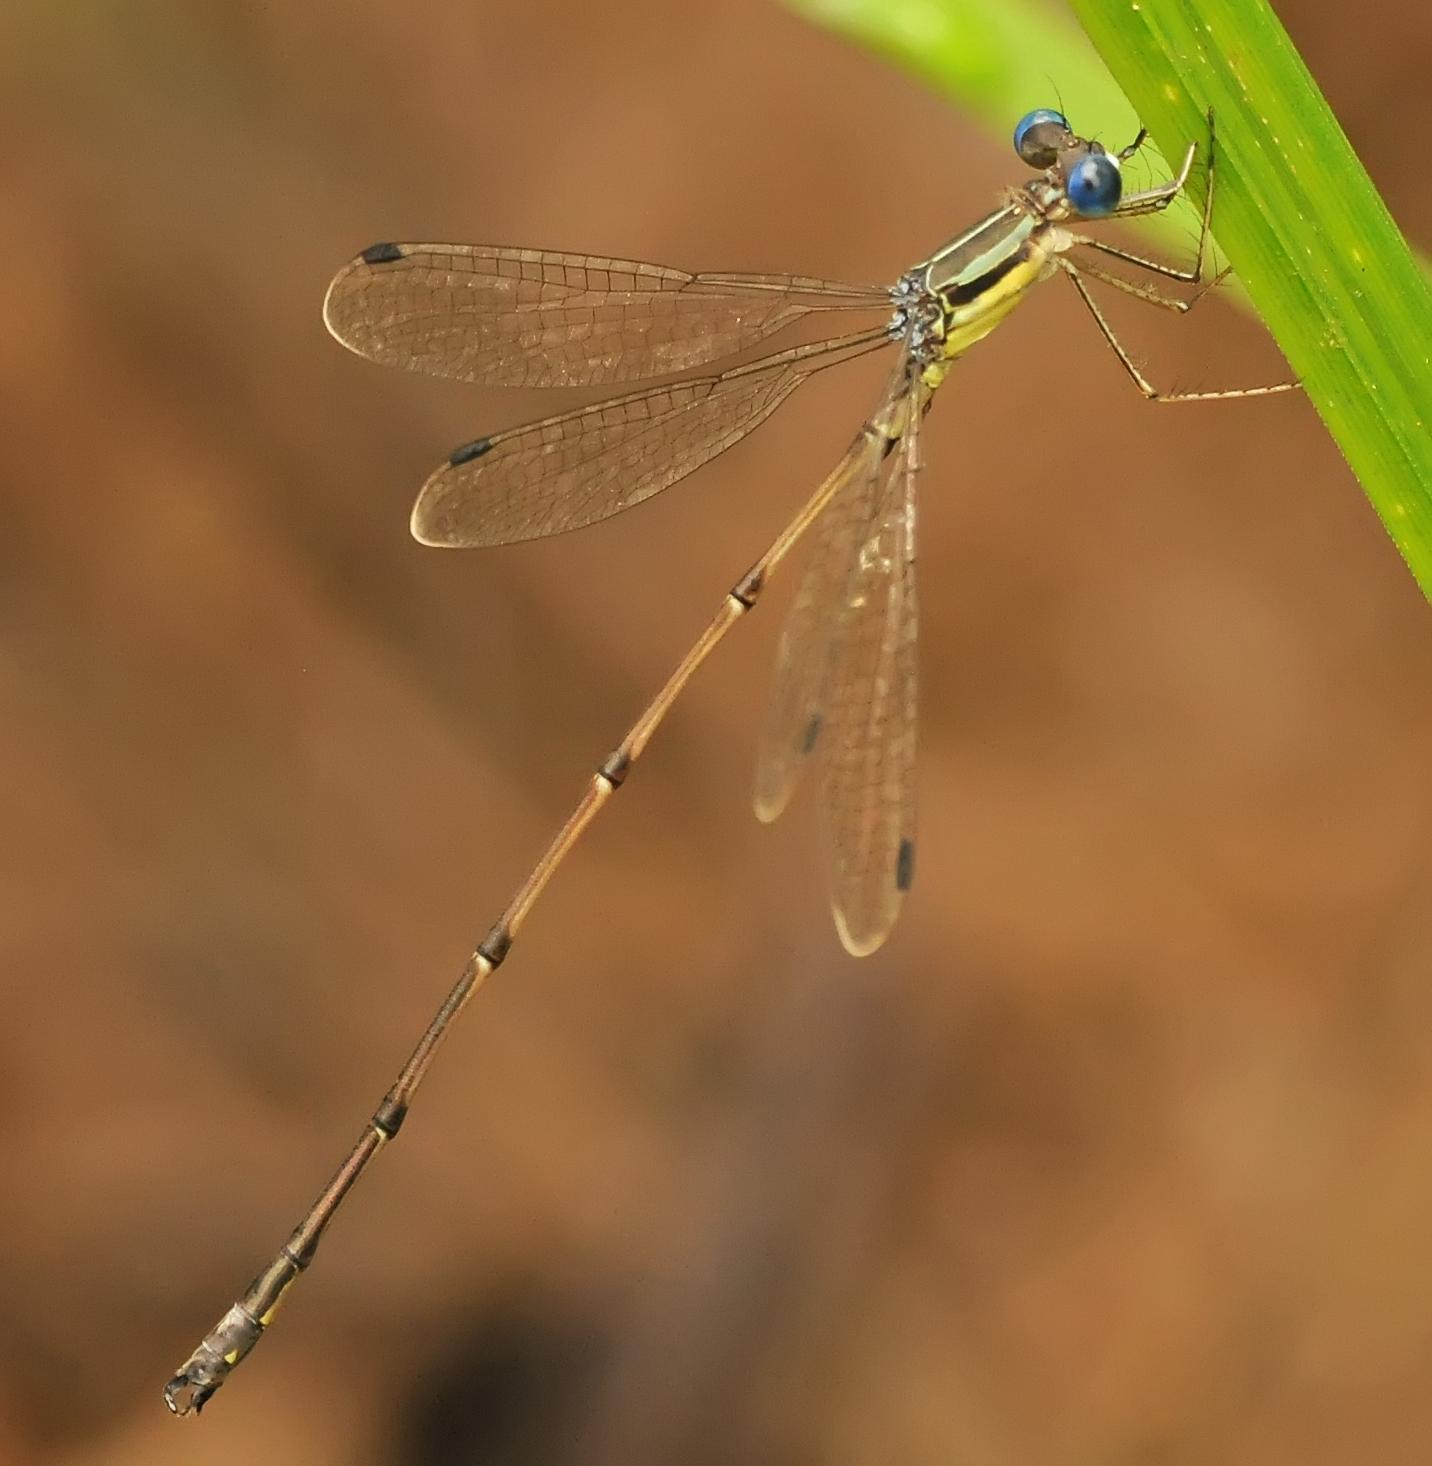 Slender Spreadwing Photo by marion dobbs